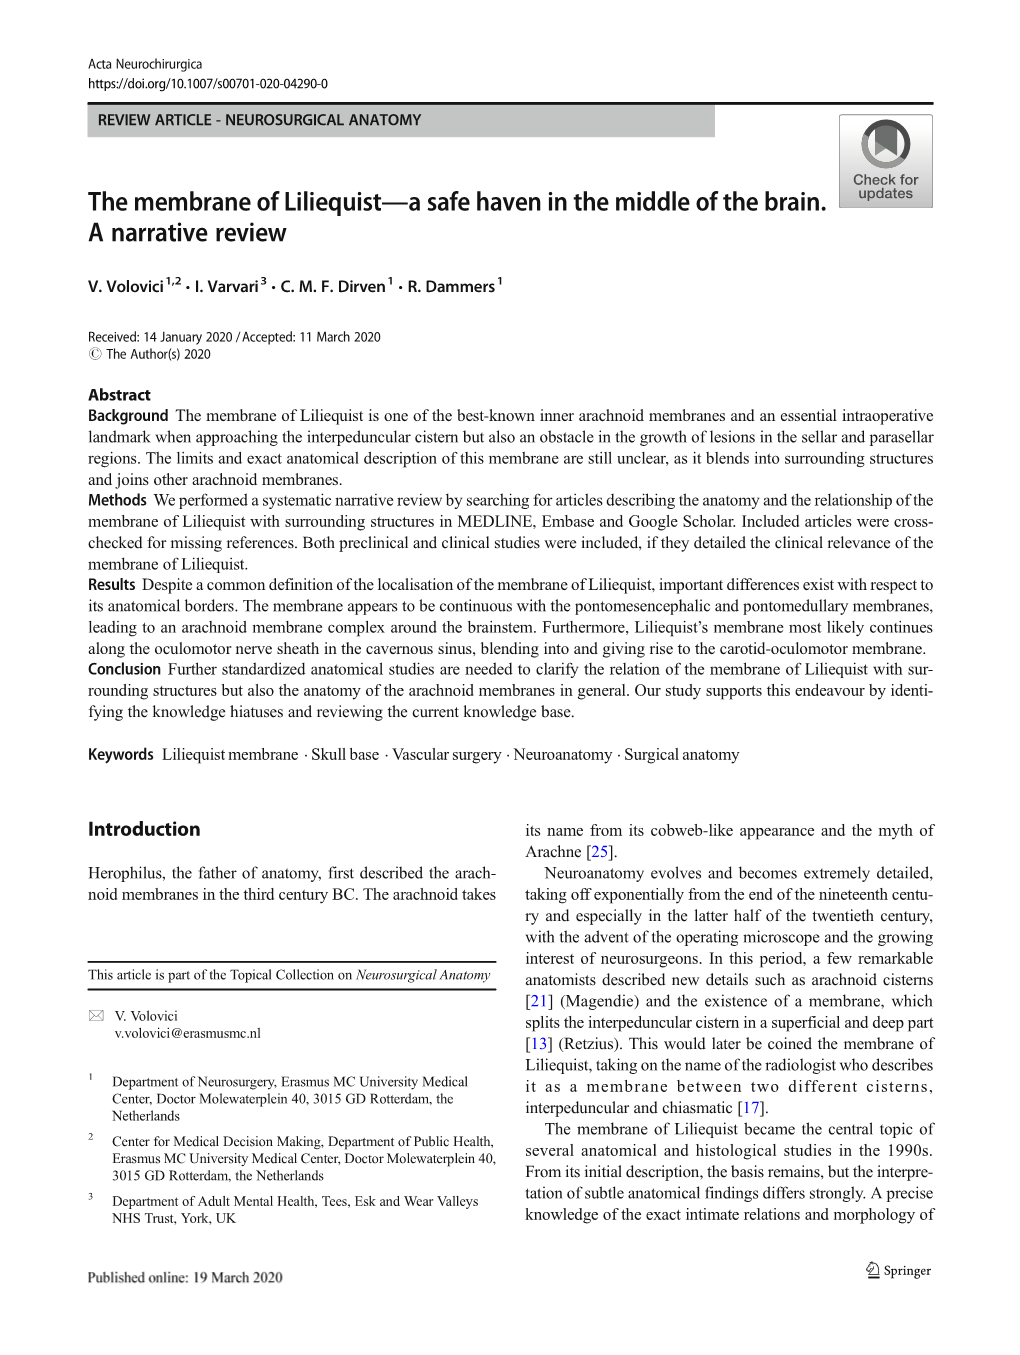 The Membrane of Liliequist—A Safe Haven in the Middle of the Brain. a Narrative Review